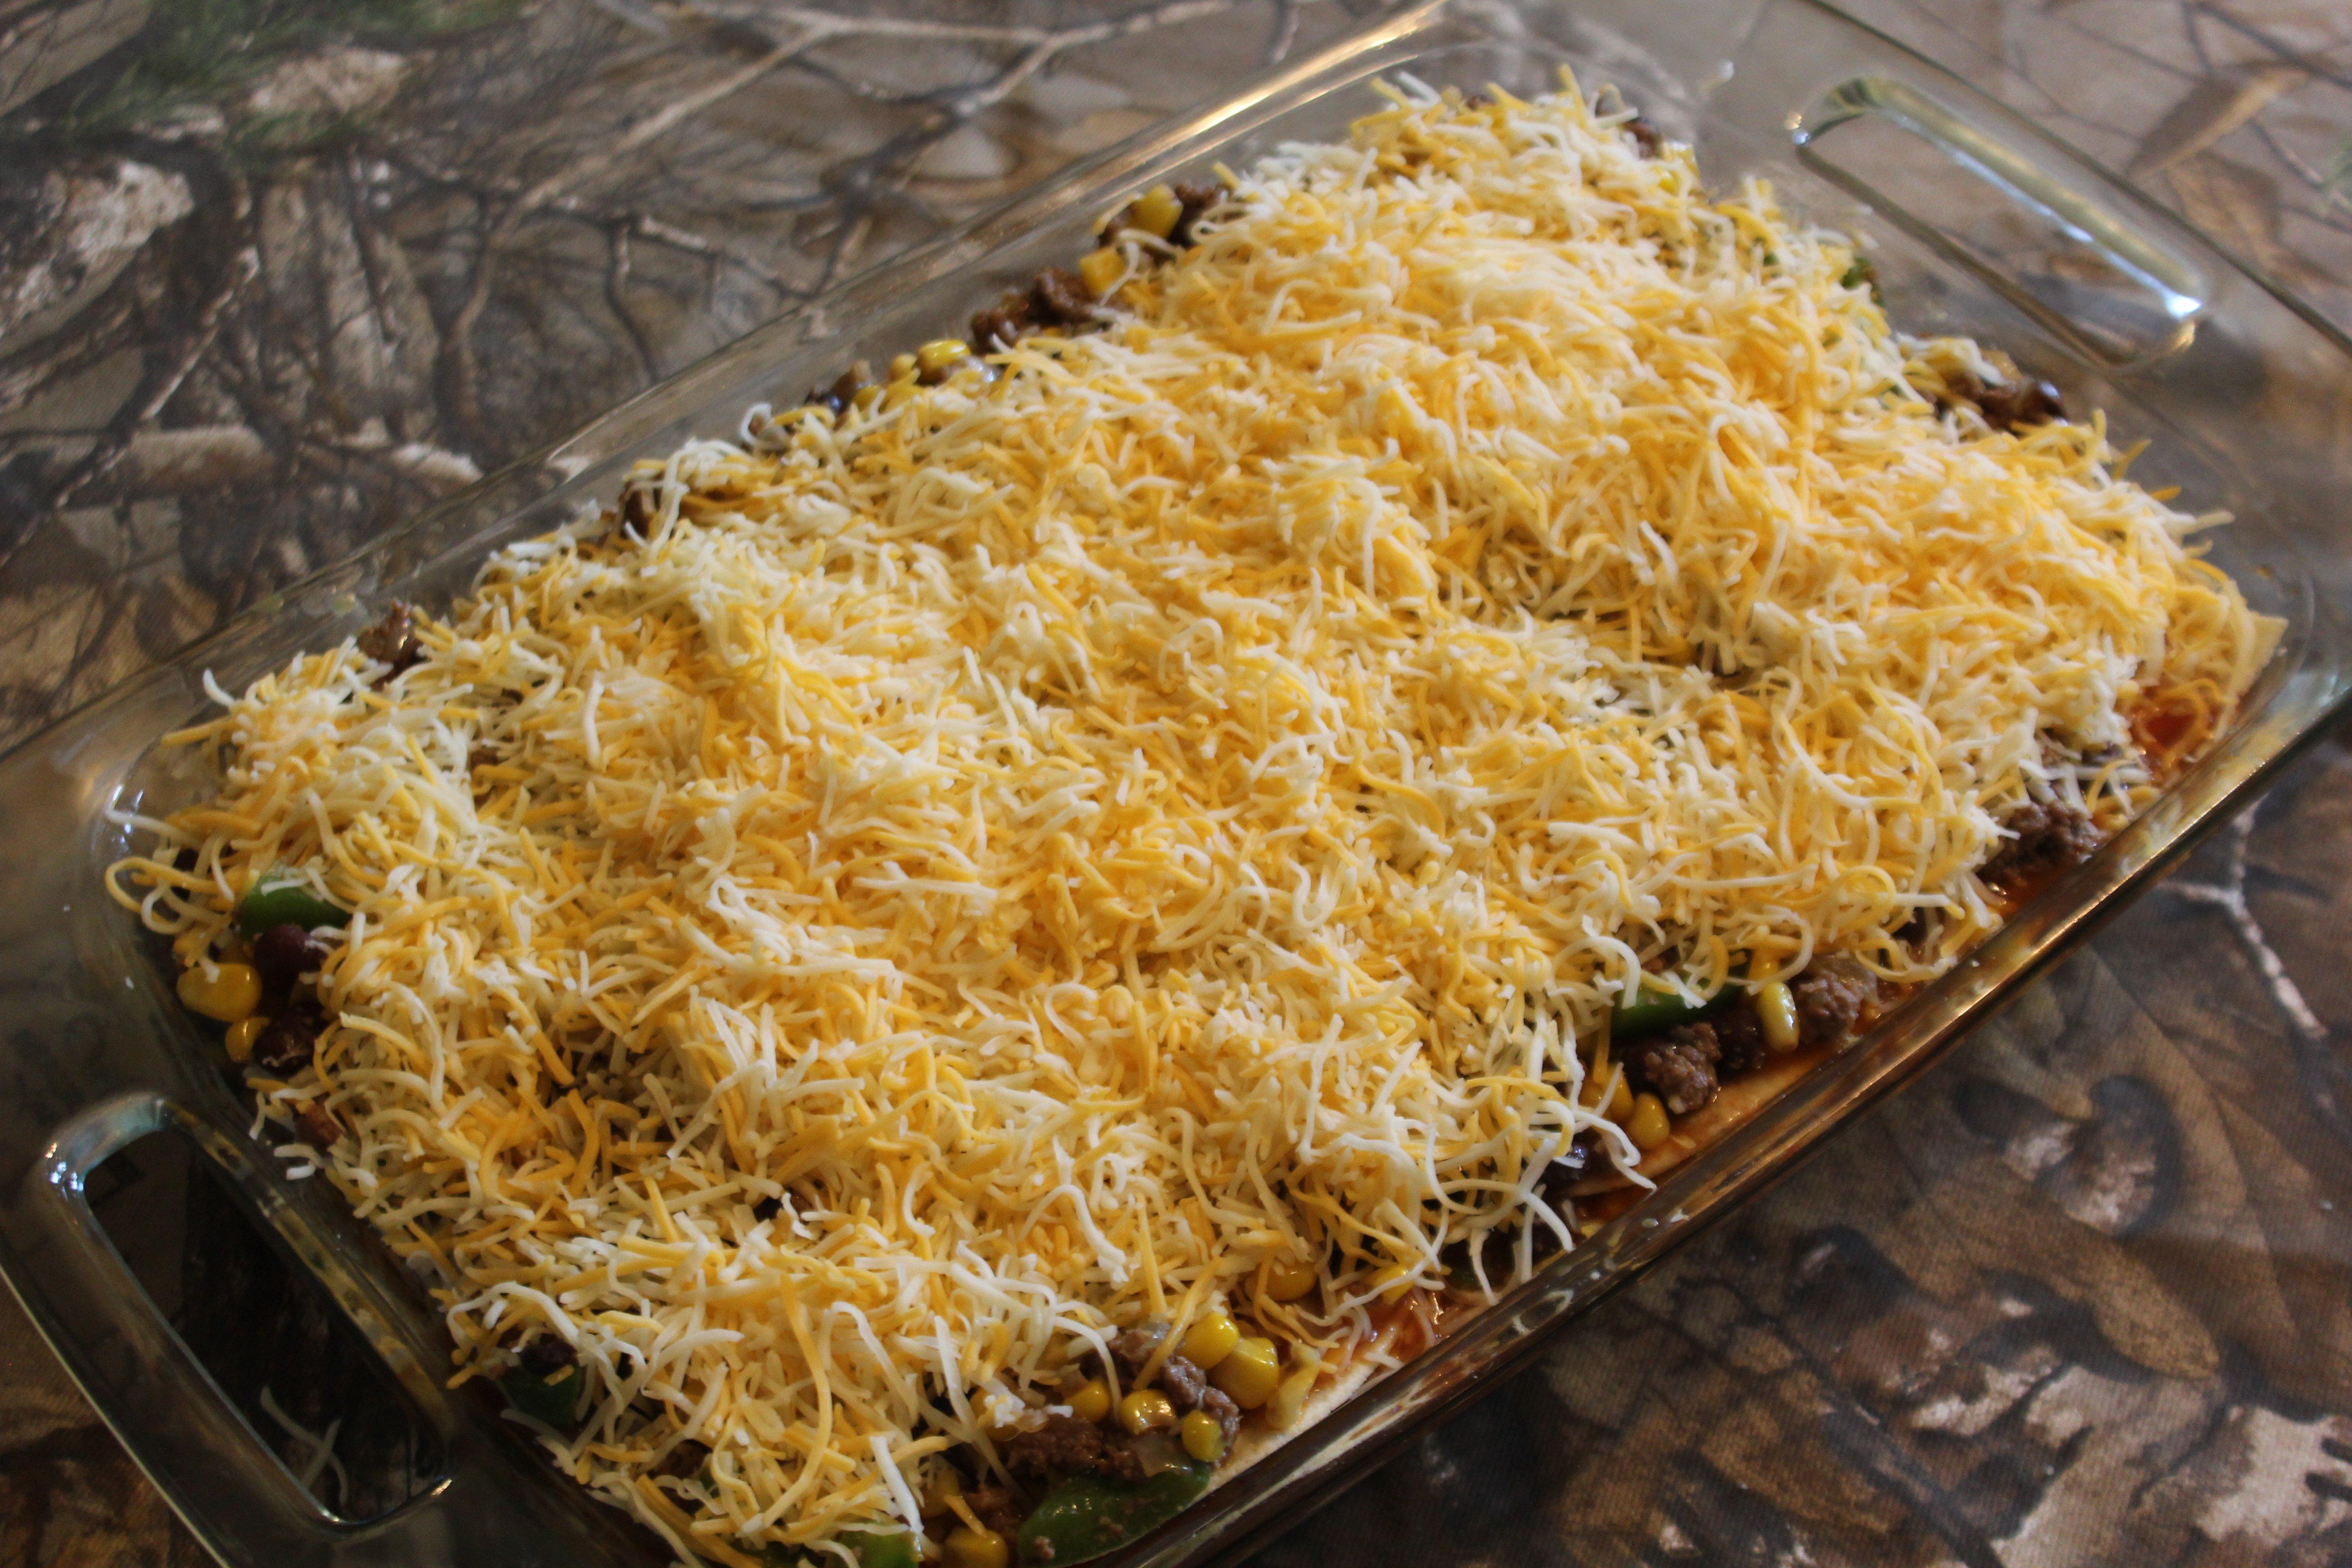 Finish the layers with the remaining cheese.